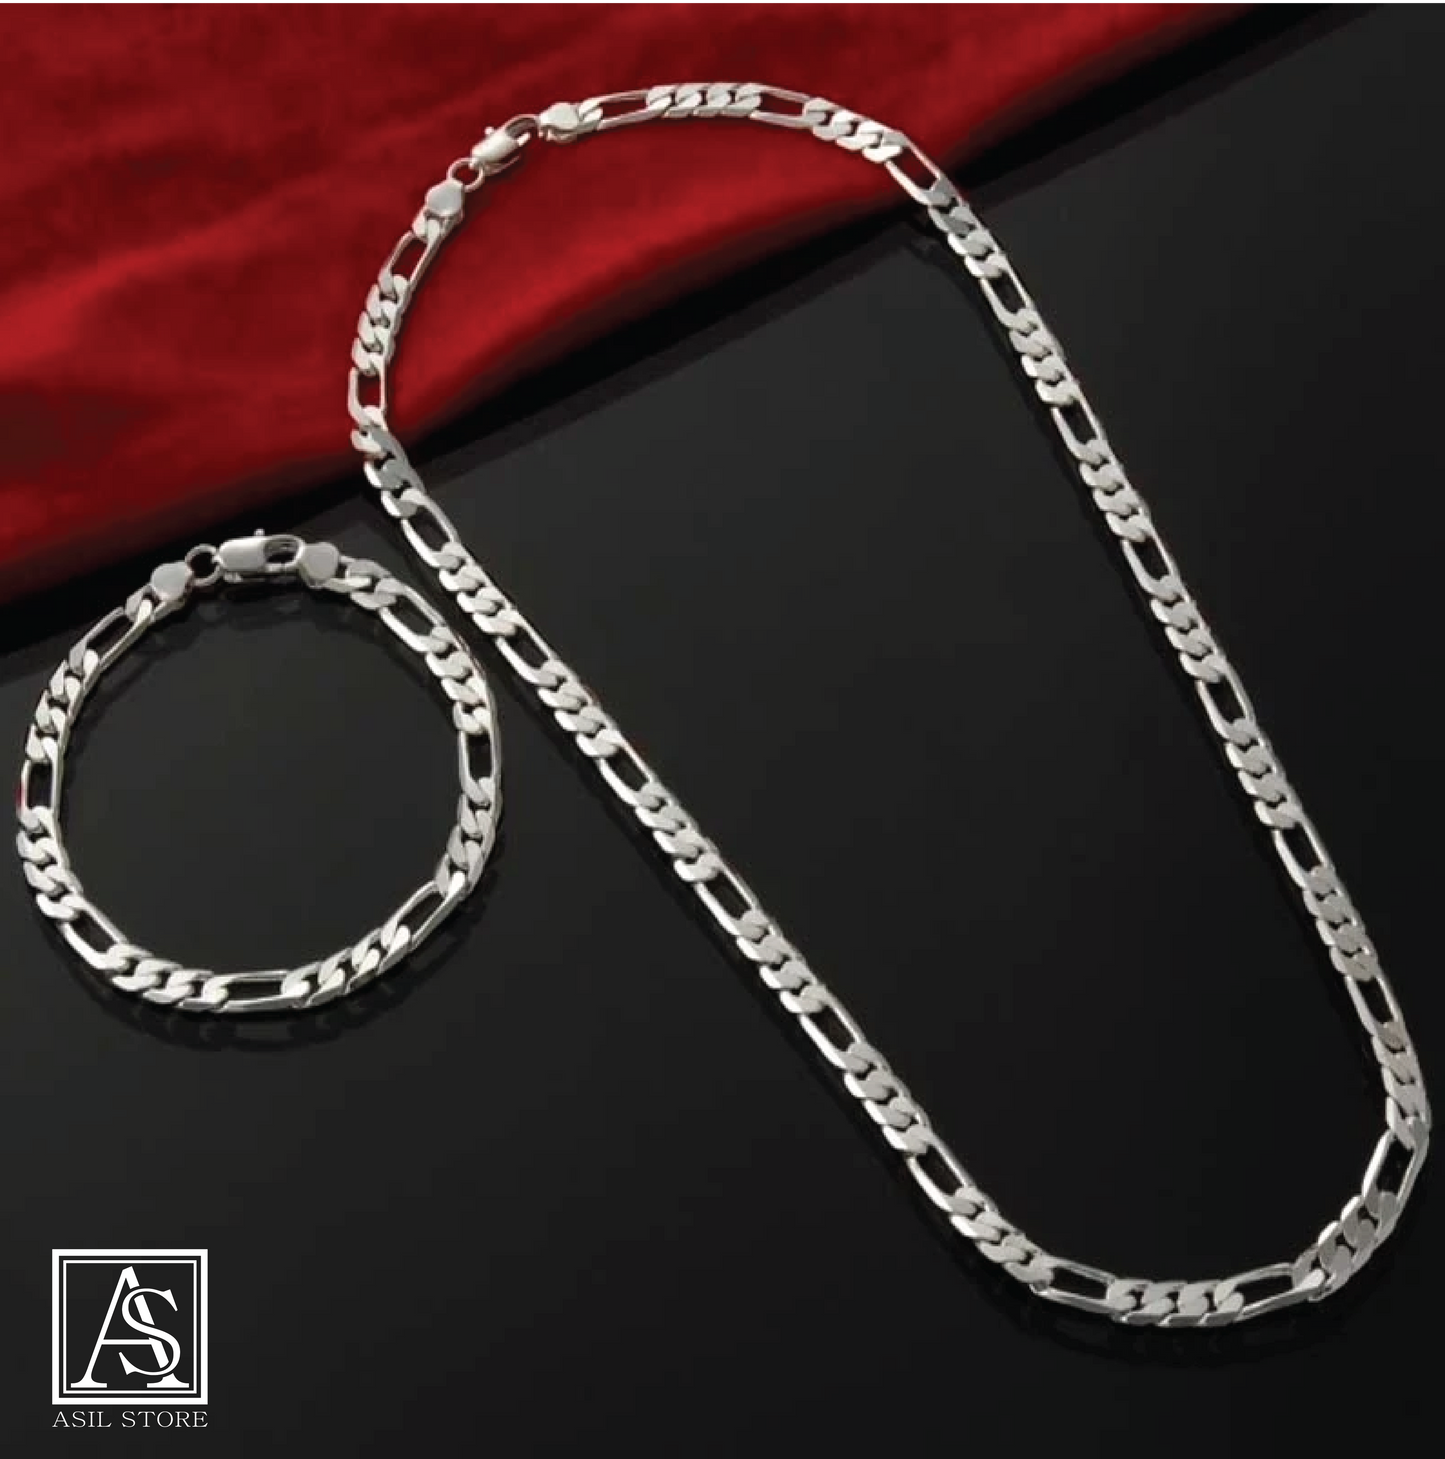 ASIL STORE : Elegance jewelry collection for men  from Asil store Model number : 003